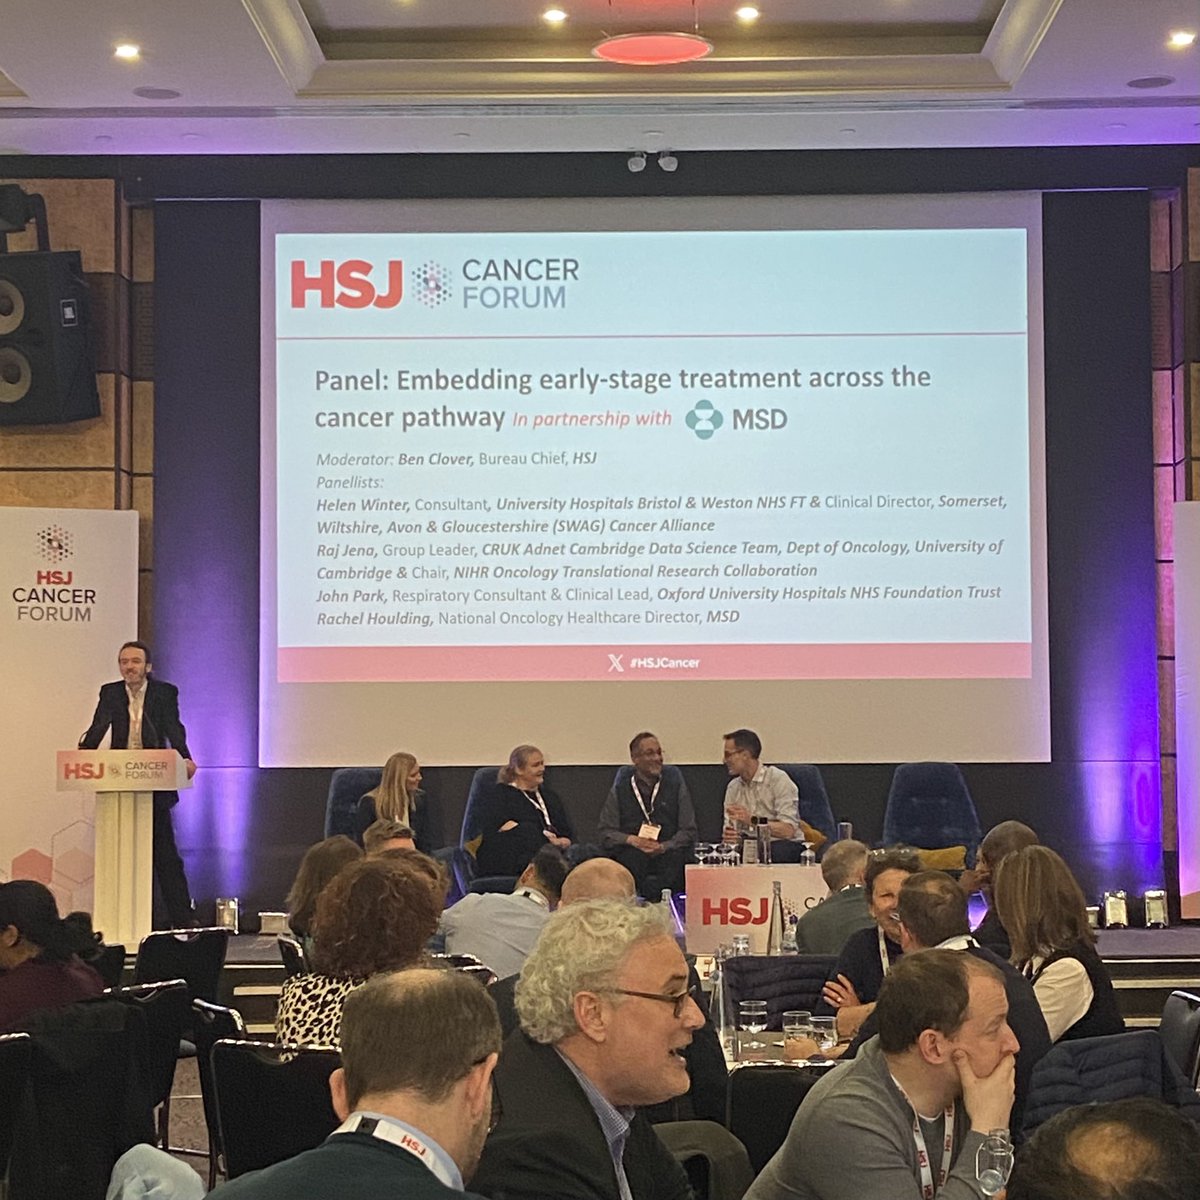 Great to see @SWAGCaAlliance’s Helen Winter sharing insights into embedding early-stage treatment across cancer pathways @HSJevents #HSJCancer Forum: ‘Trust our staff, value them, give them opportunities to radically transform services’